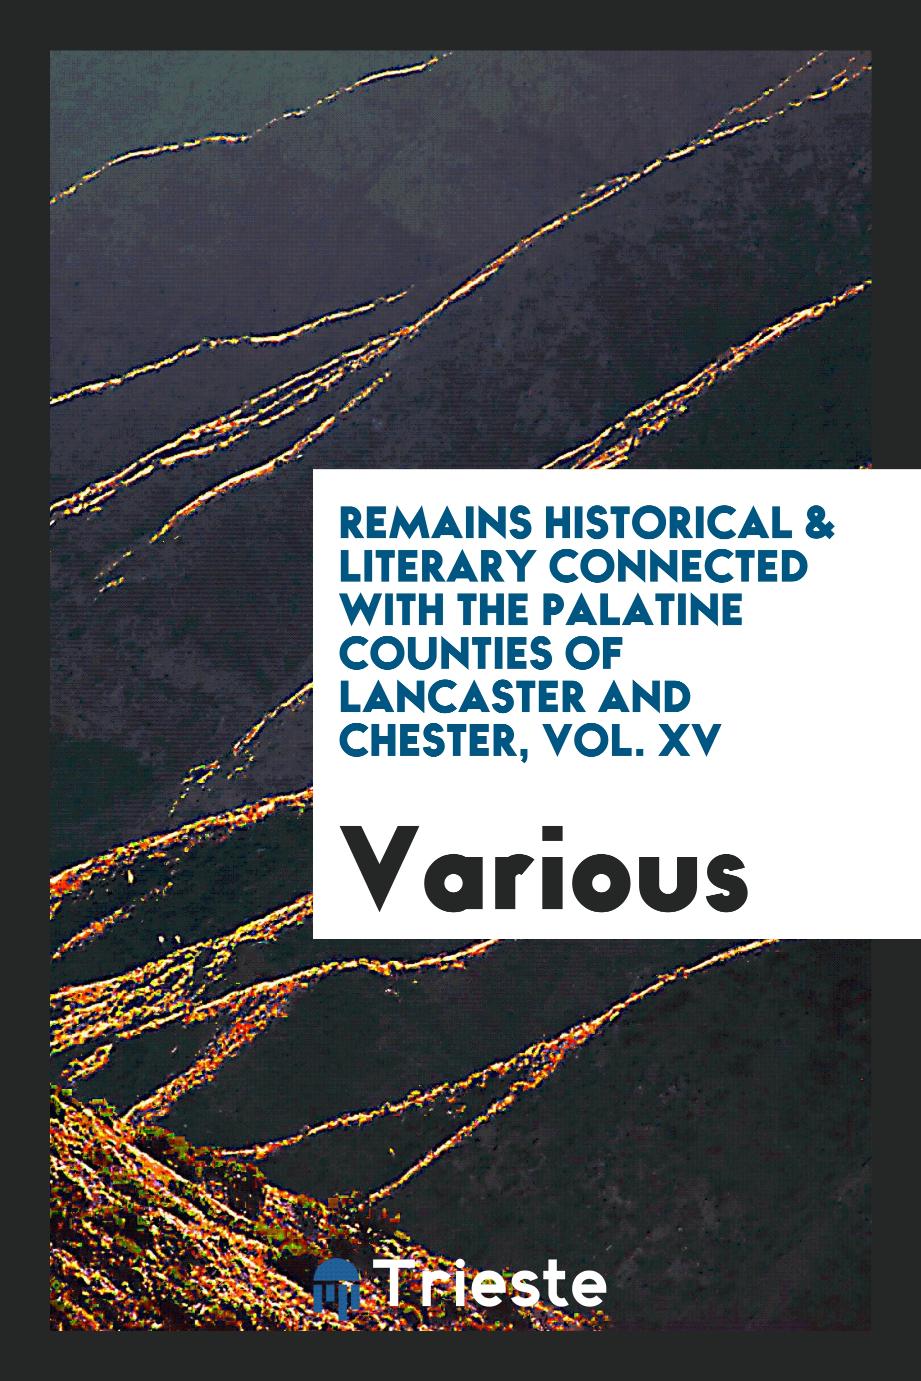 Remains Historical & Literary Connected with the Palatine Counties of Lancaster and Chester, Vol. XV